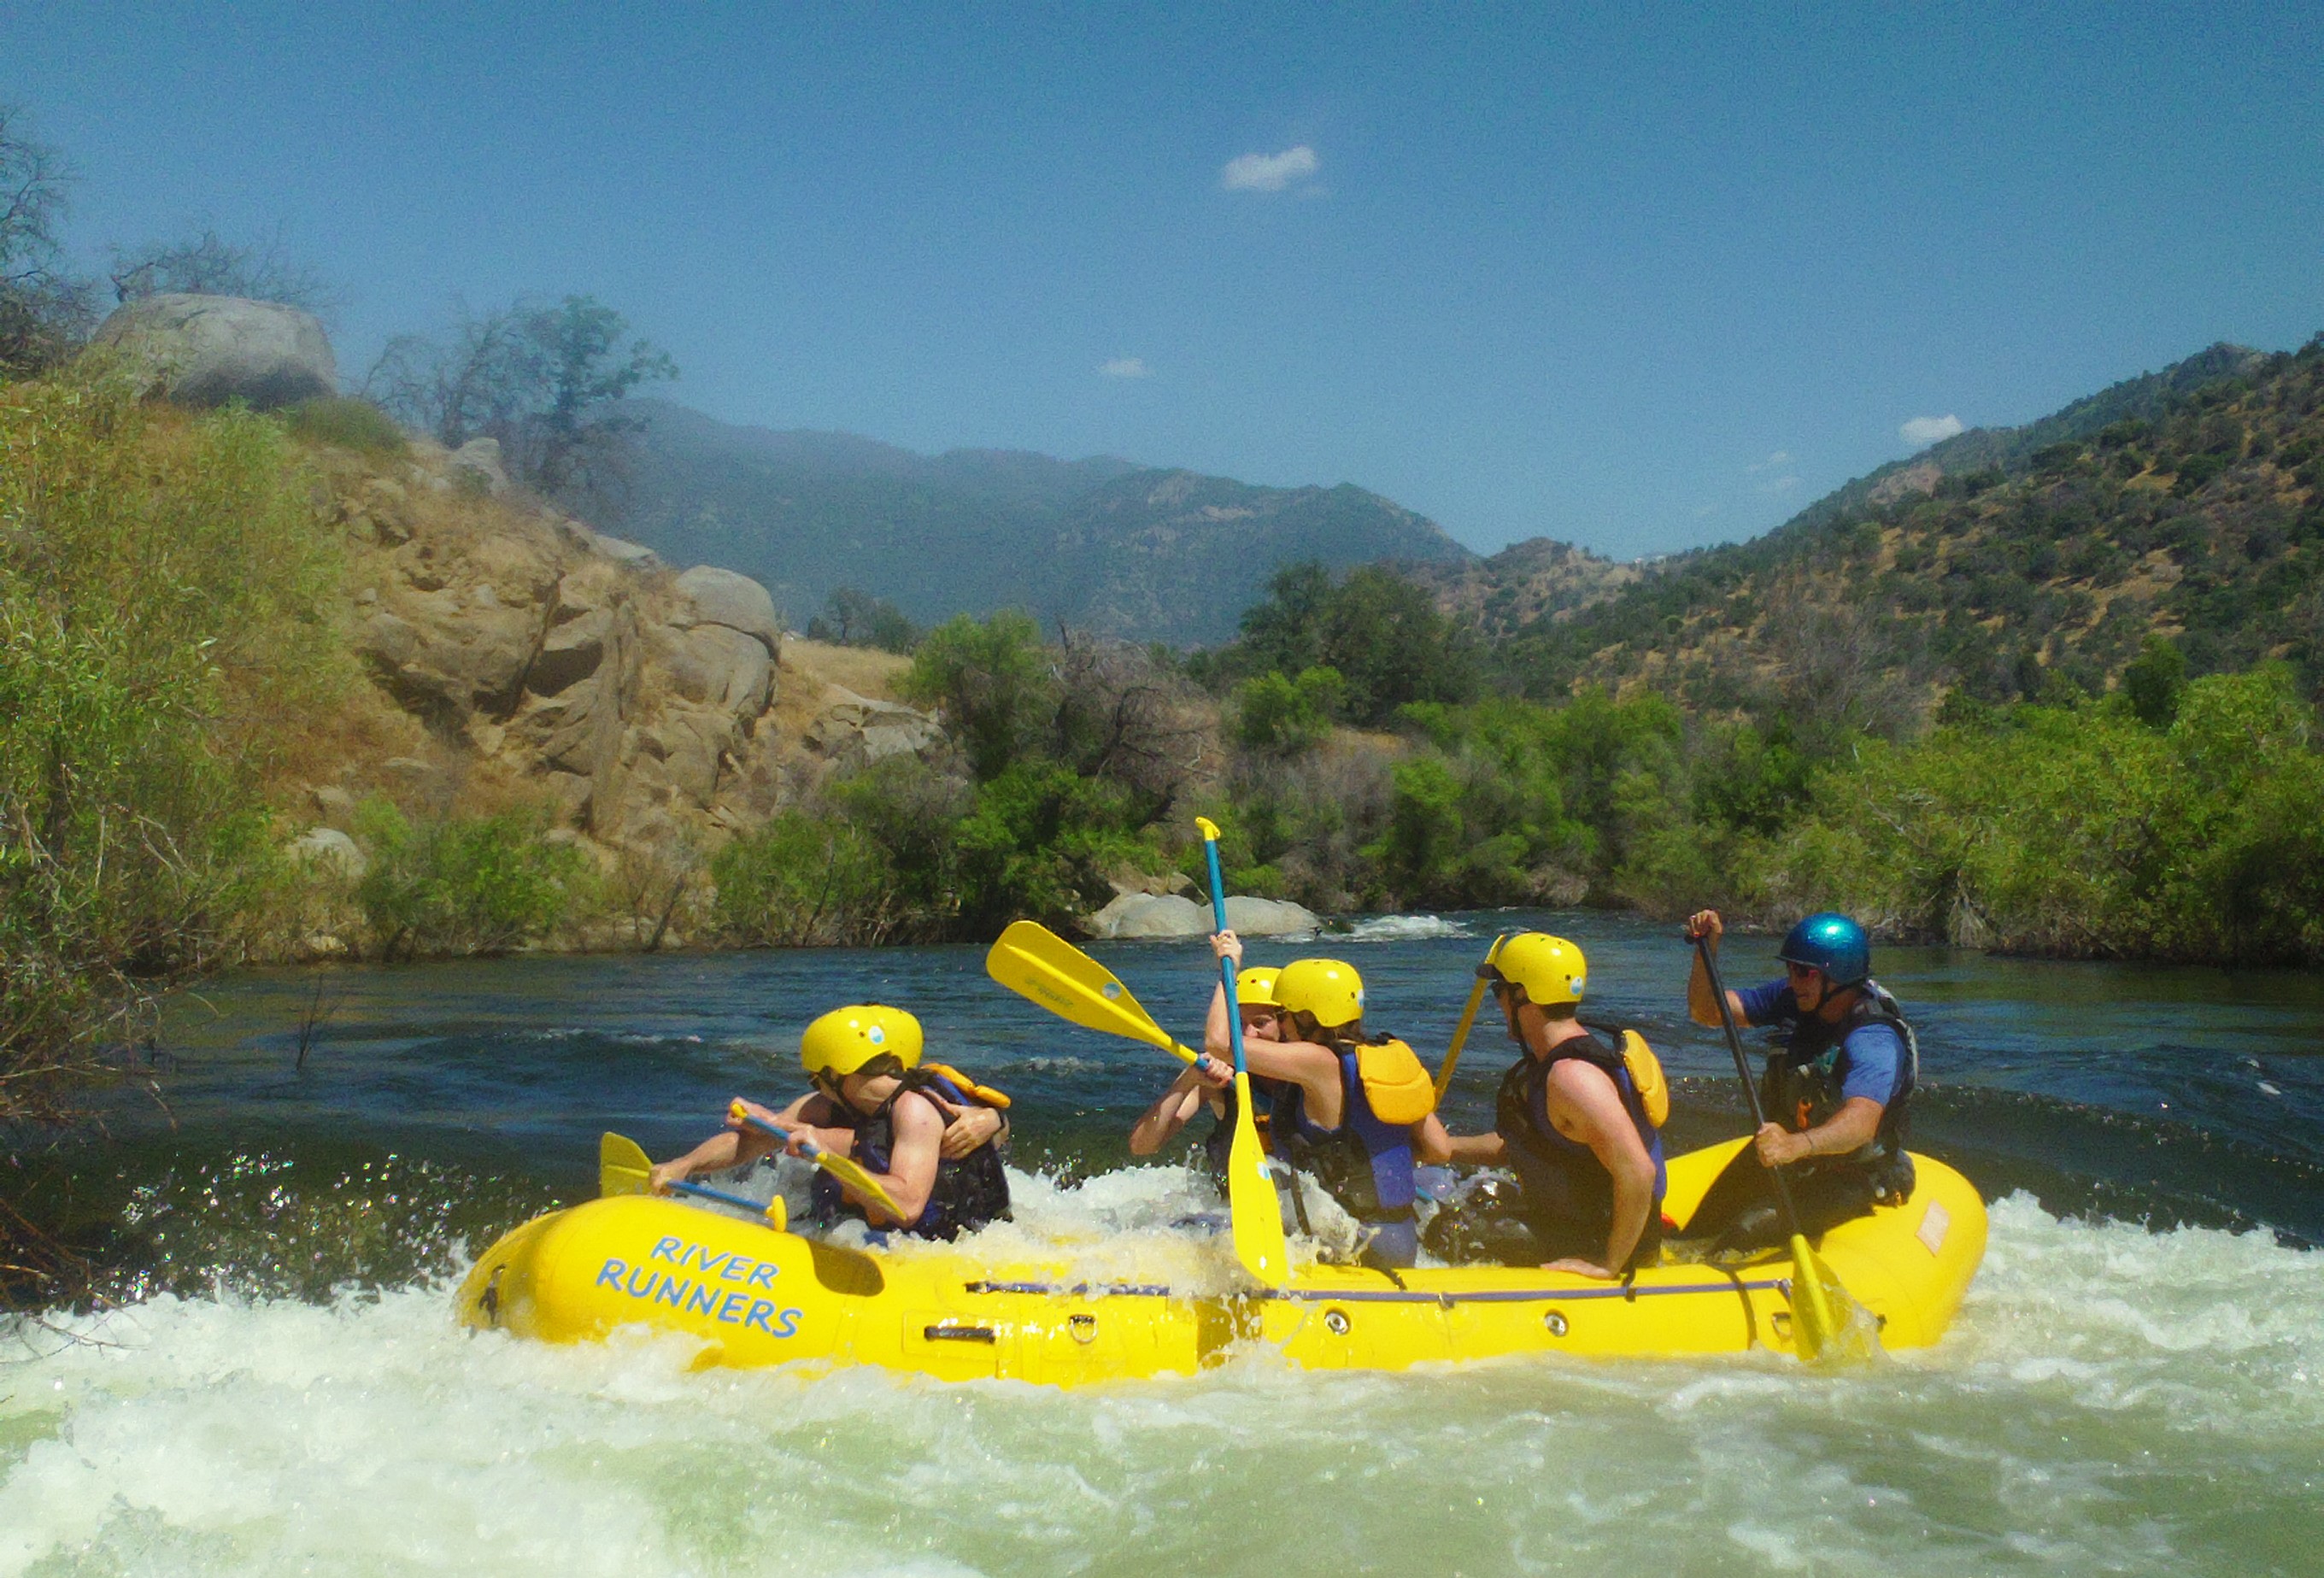 Paddlers in a yellow raft get ready for some whitewater action